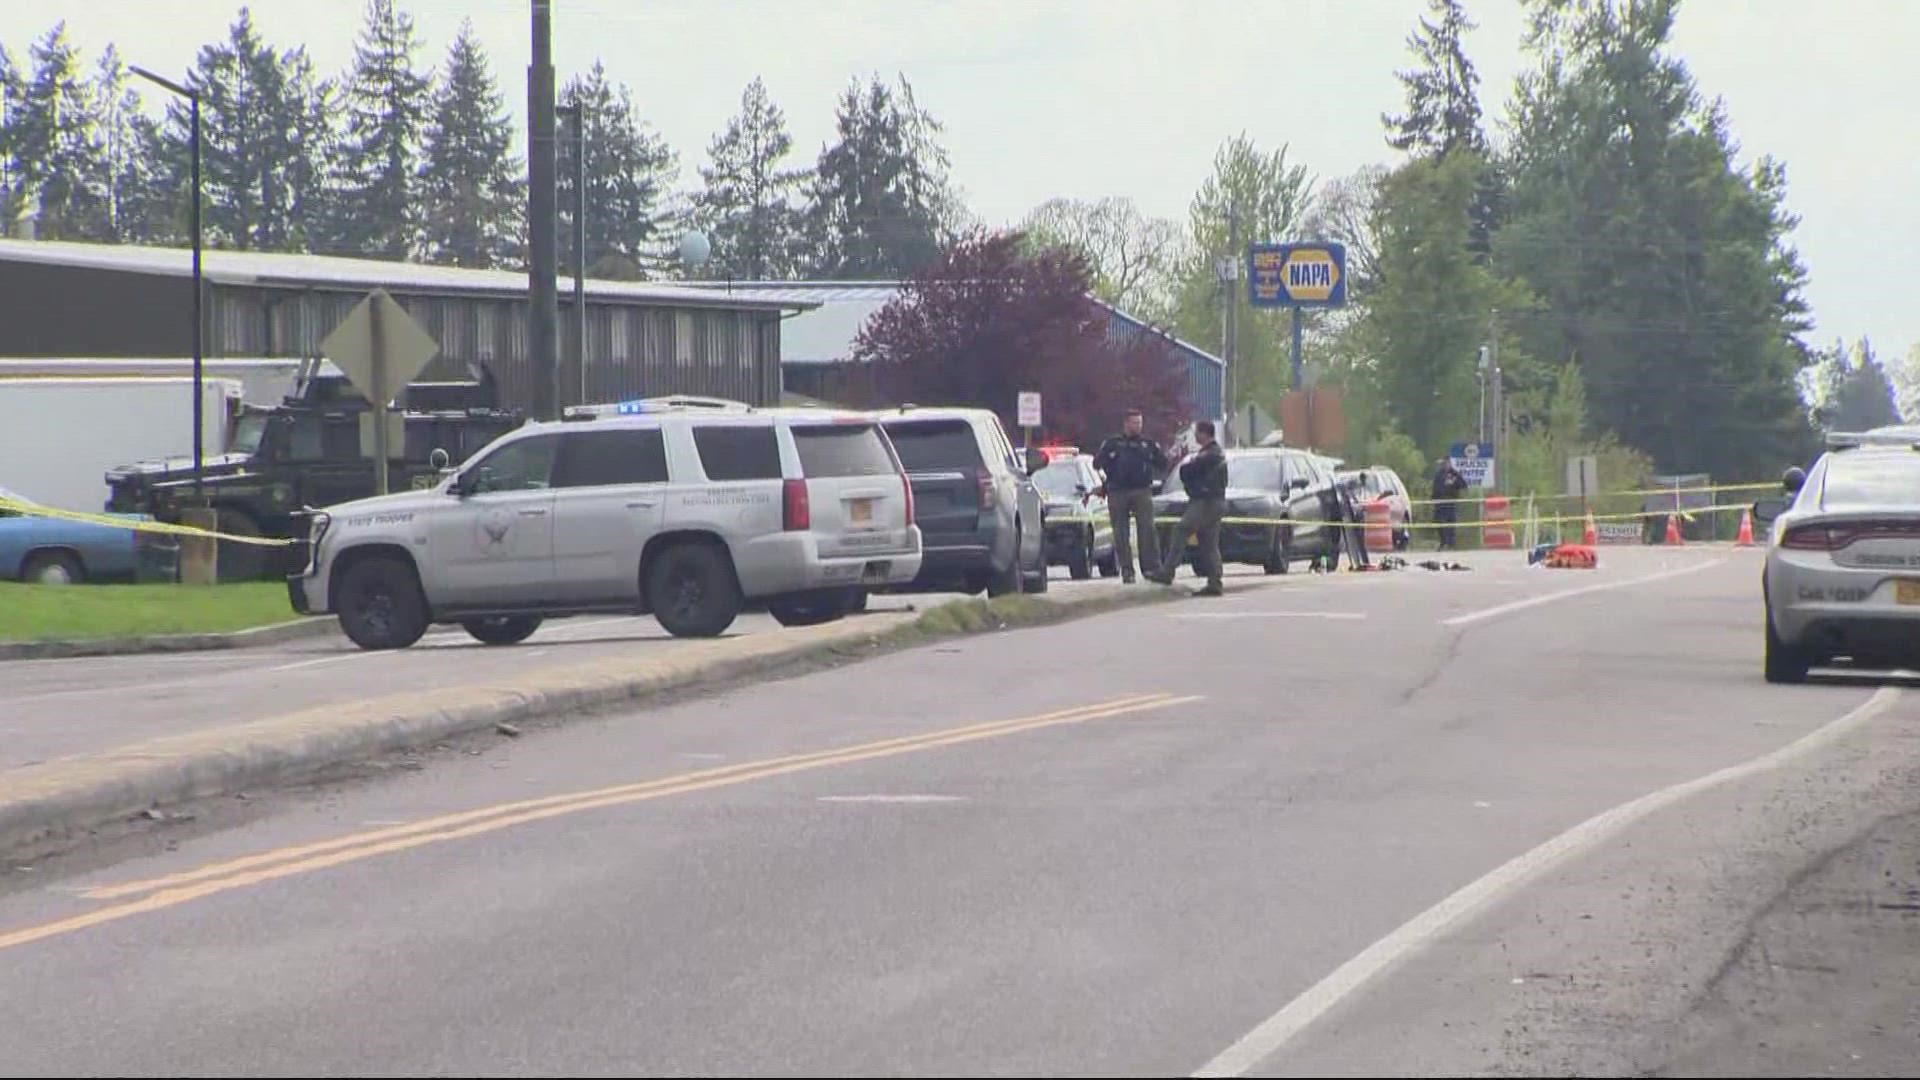 The Marion County Sheriff's Office said that SWAT had been called in after a fugitive was spotted outside of the Flying J truck stop south of Wilsonville.